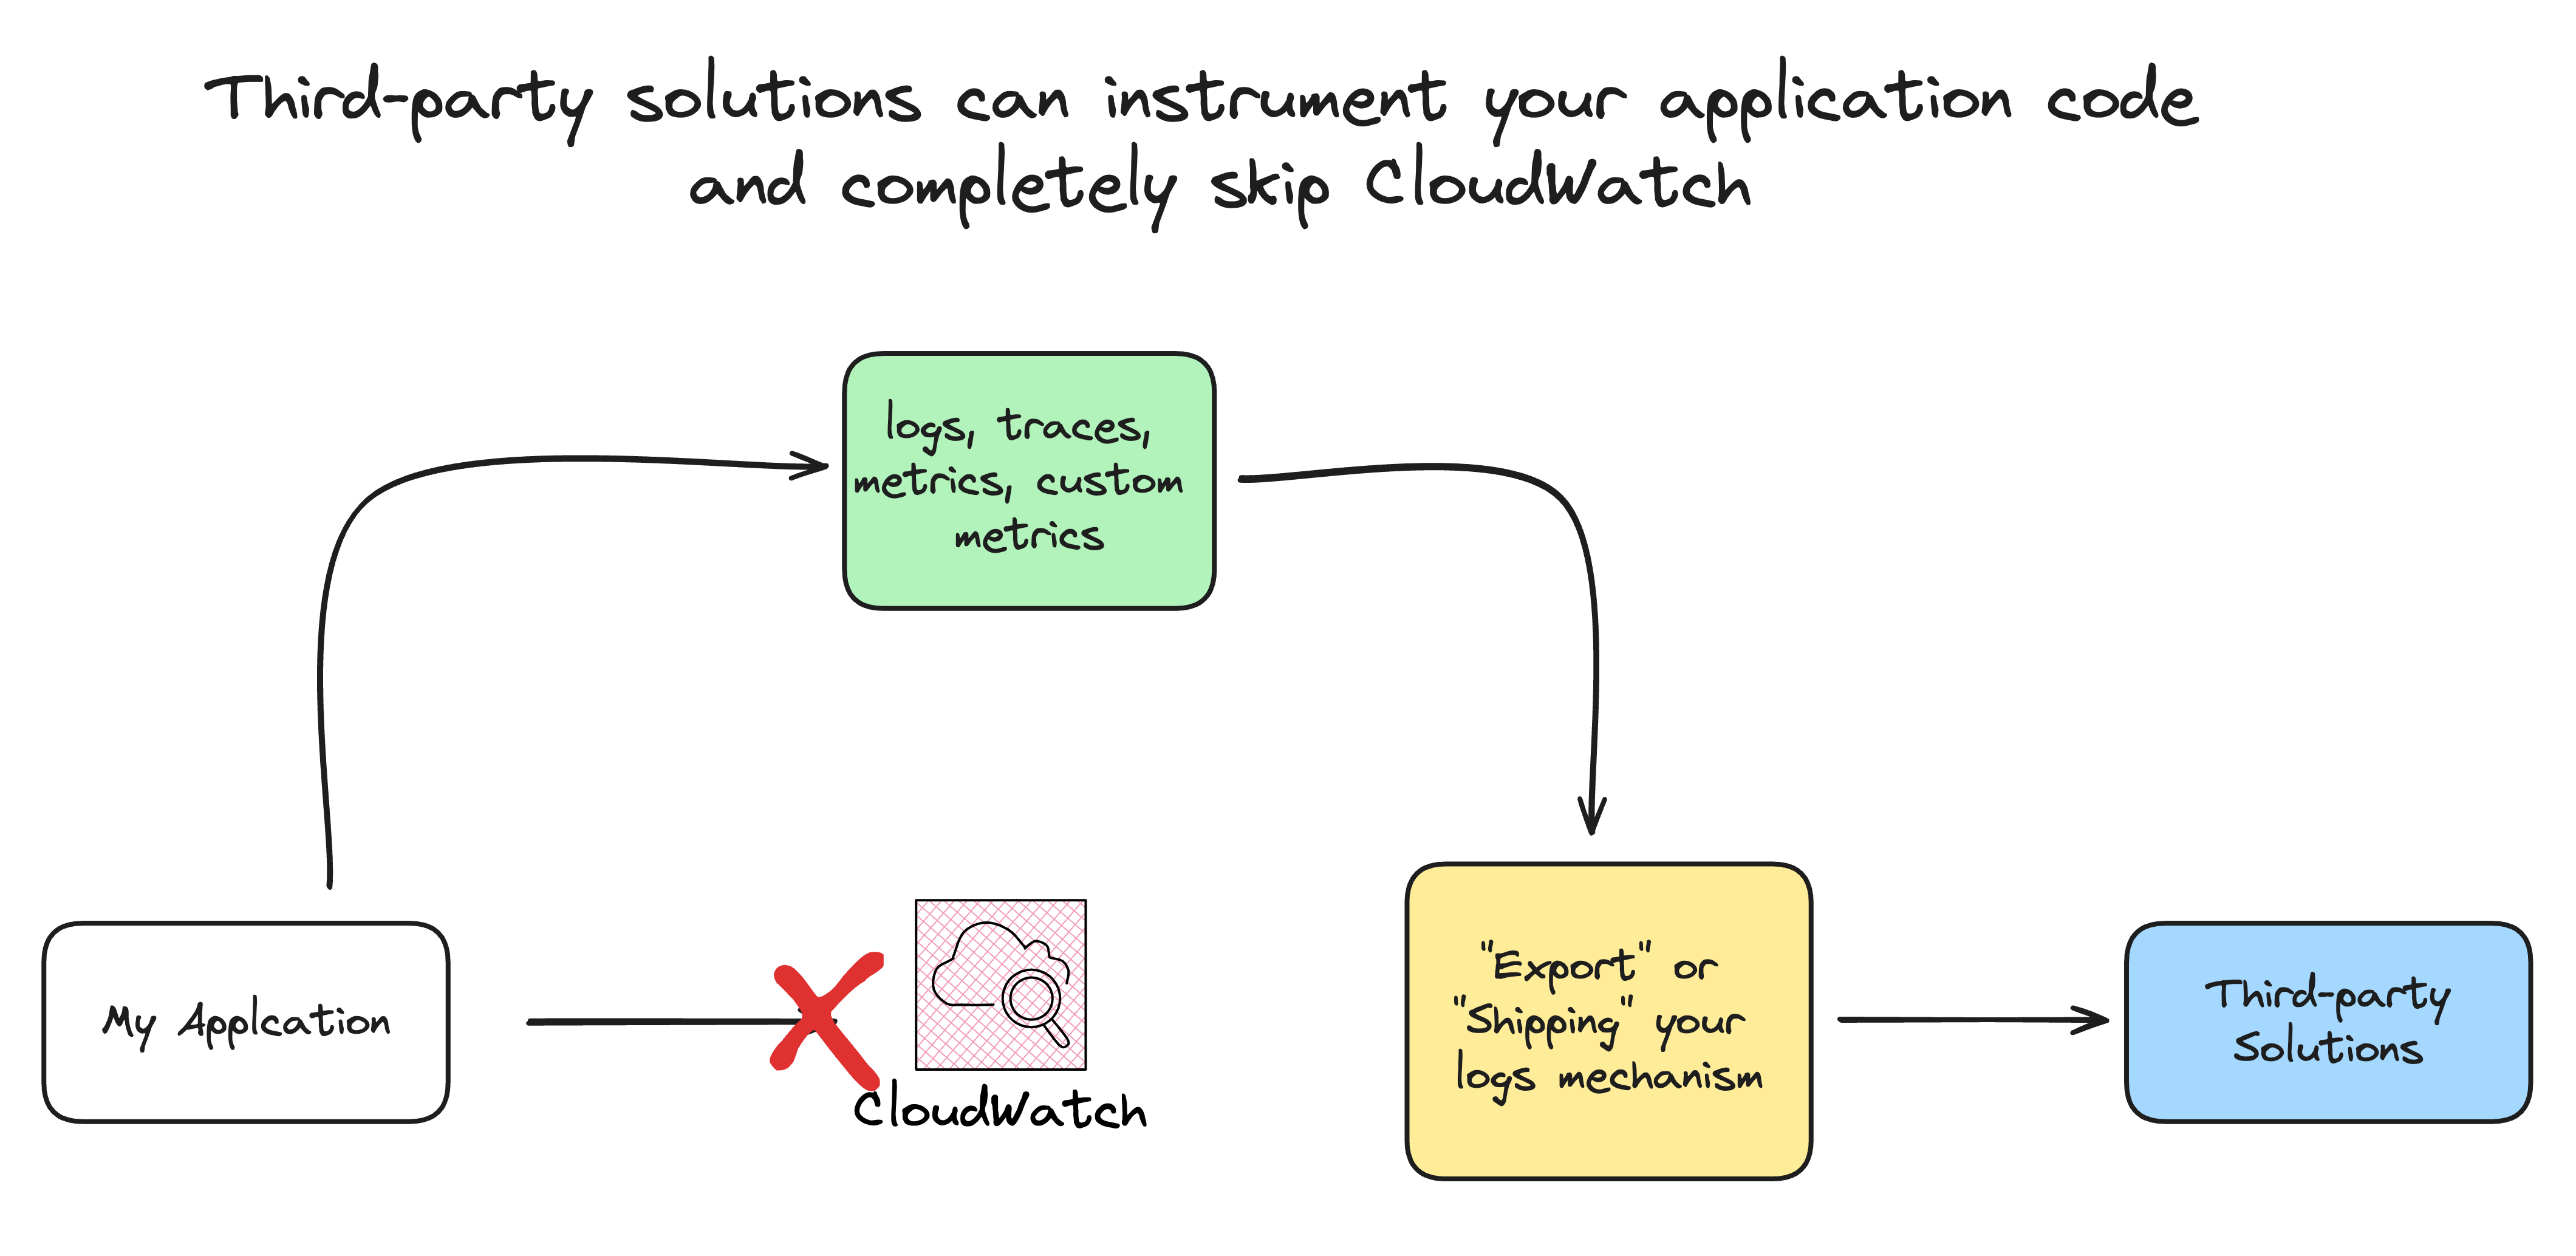 A diagram showing third-party instrumentation solutions that can skip CloudWatch completely.